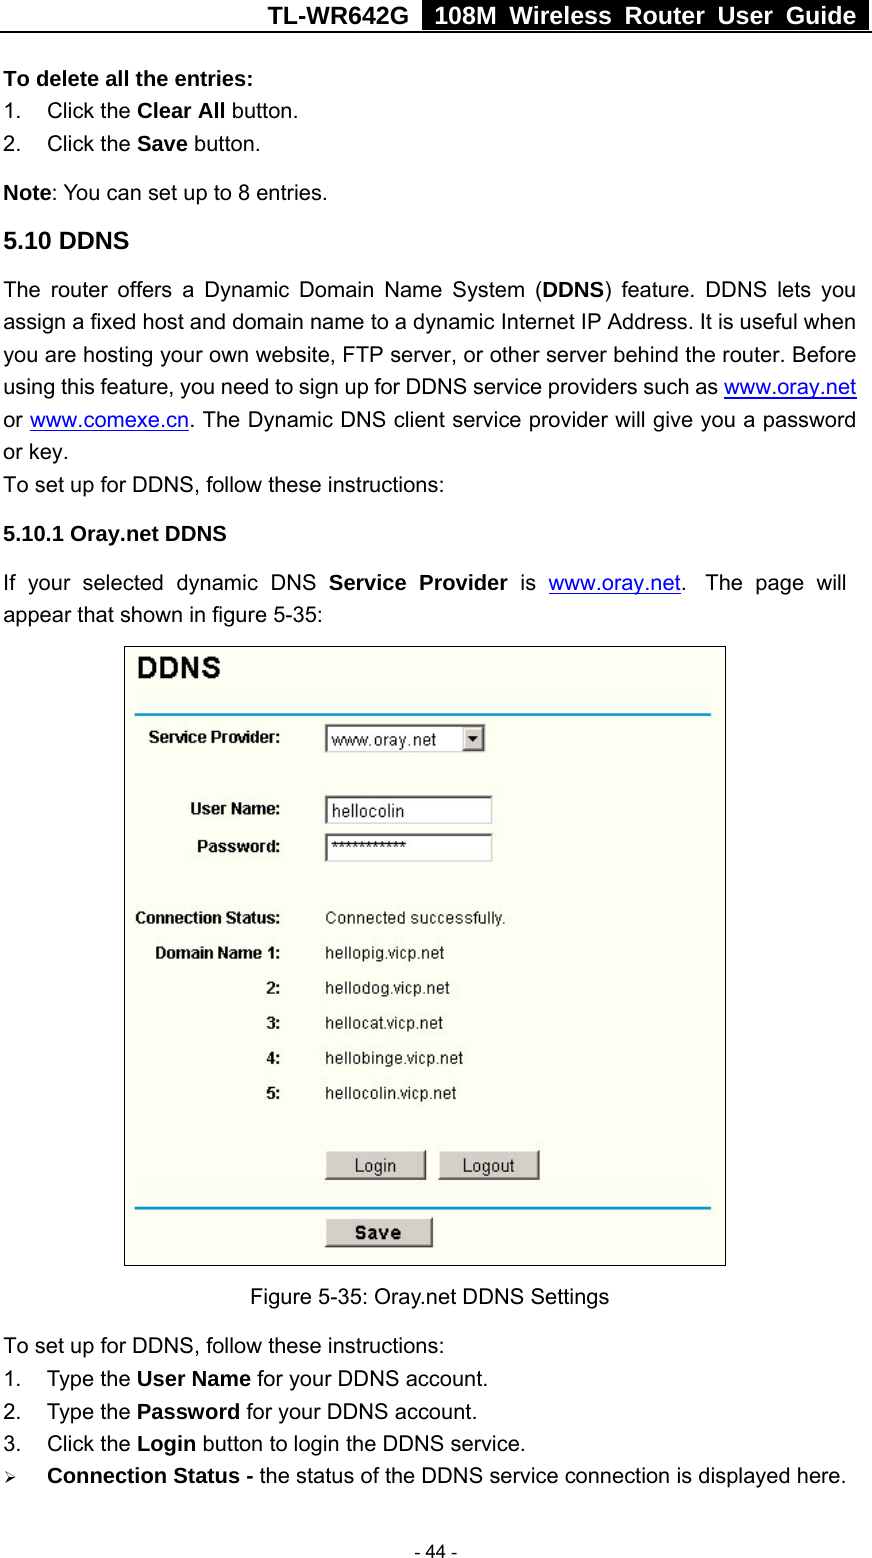 TL-WR642G   108M Wireless Router User Guide   - 44 - To delete all the entries: 1. Click the Clear All button. 2. Click the Save button. Note: You can set up to 8 entries. 5.10 DDNS The router offers a Dynamic Domain Name System (DDNS) feature. DDNS lets you assign a fixed host and domain name to a dynamic Internet IP Address. It is useful when you are hosting your own website, FTP server, or other server behind the router. Before using this feature, you need to sign up for DDNS service providers such as www.oray.net or www.comexe.cn. The Dynamic DNS client service provider will give you a password or key. To set up for DDNS, follow these instructions: 5.10.1 Oray.net DDNS If your selected dynamic DNS Service Provider is  www.oray.net.  The page will appear that shown in figure 5-35:   Figure 5-35: Oray.net DDNS Settings To set up for DDNS, follow these instructions: 1. Type the User Name for your DDNS account.   2. Type the Password for your DDNS account.   3. Click the Login button to login the DDNS service.   ¾ Connection Status - the status of the DDNS service connection is displayed here. 